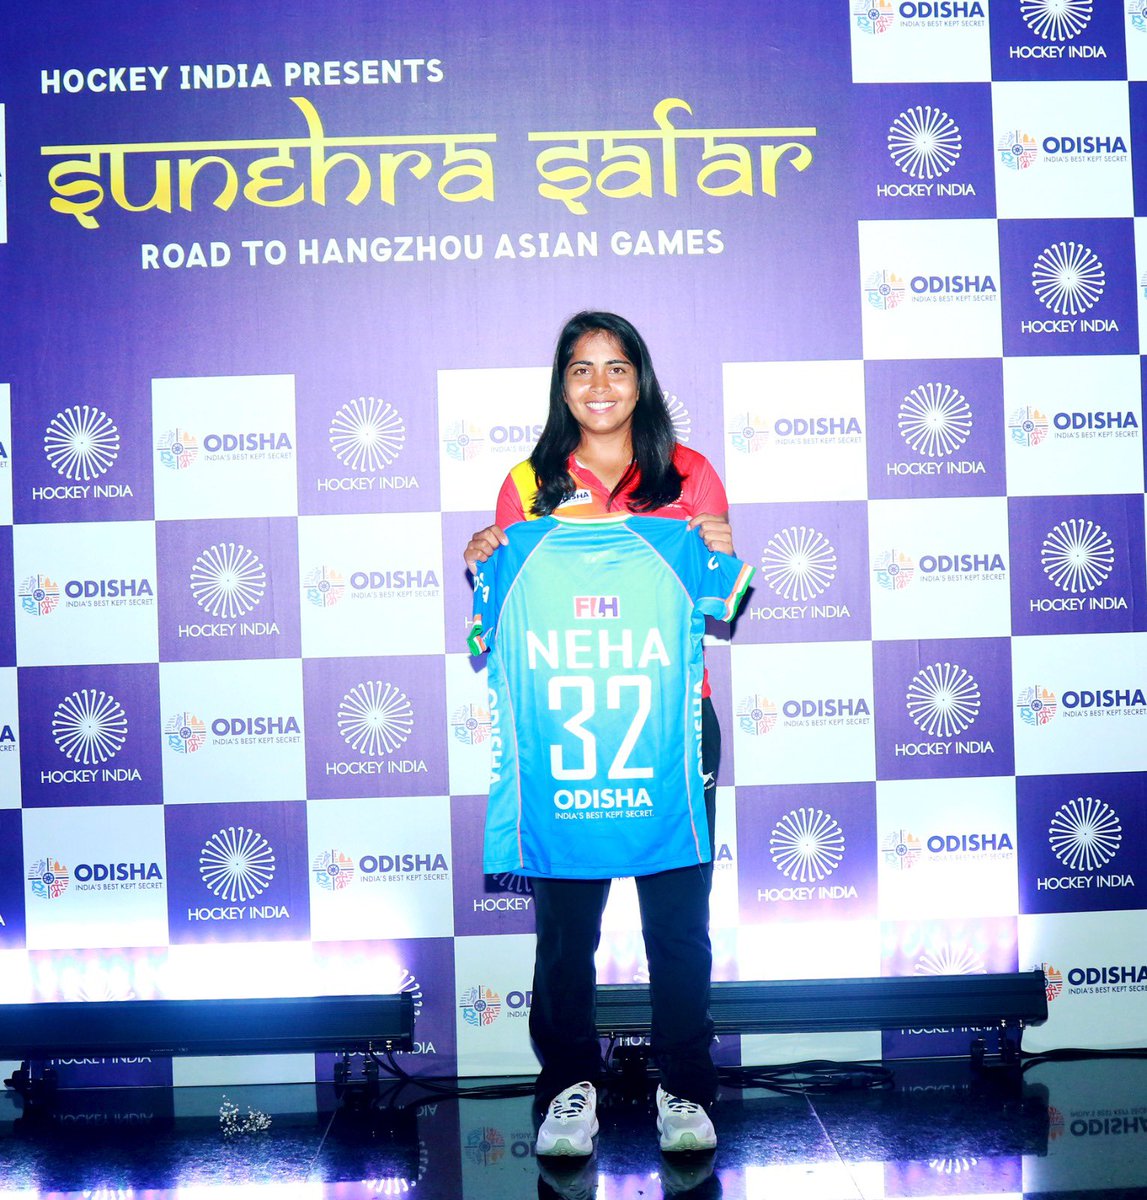 What better feeling than to recieve this jersey from my mother who worked so hard to help me pursue career in hockey. Thank you @hockeyindia for this wonderful ceremony #sunehrasafar